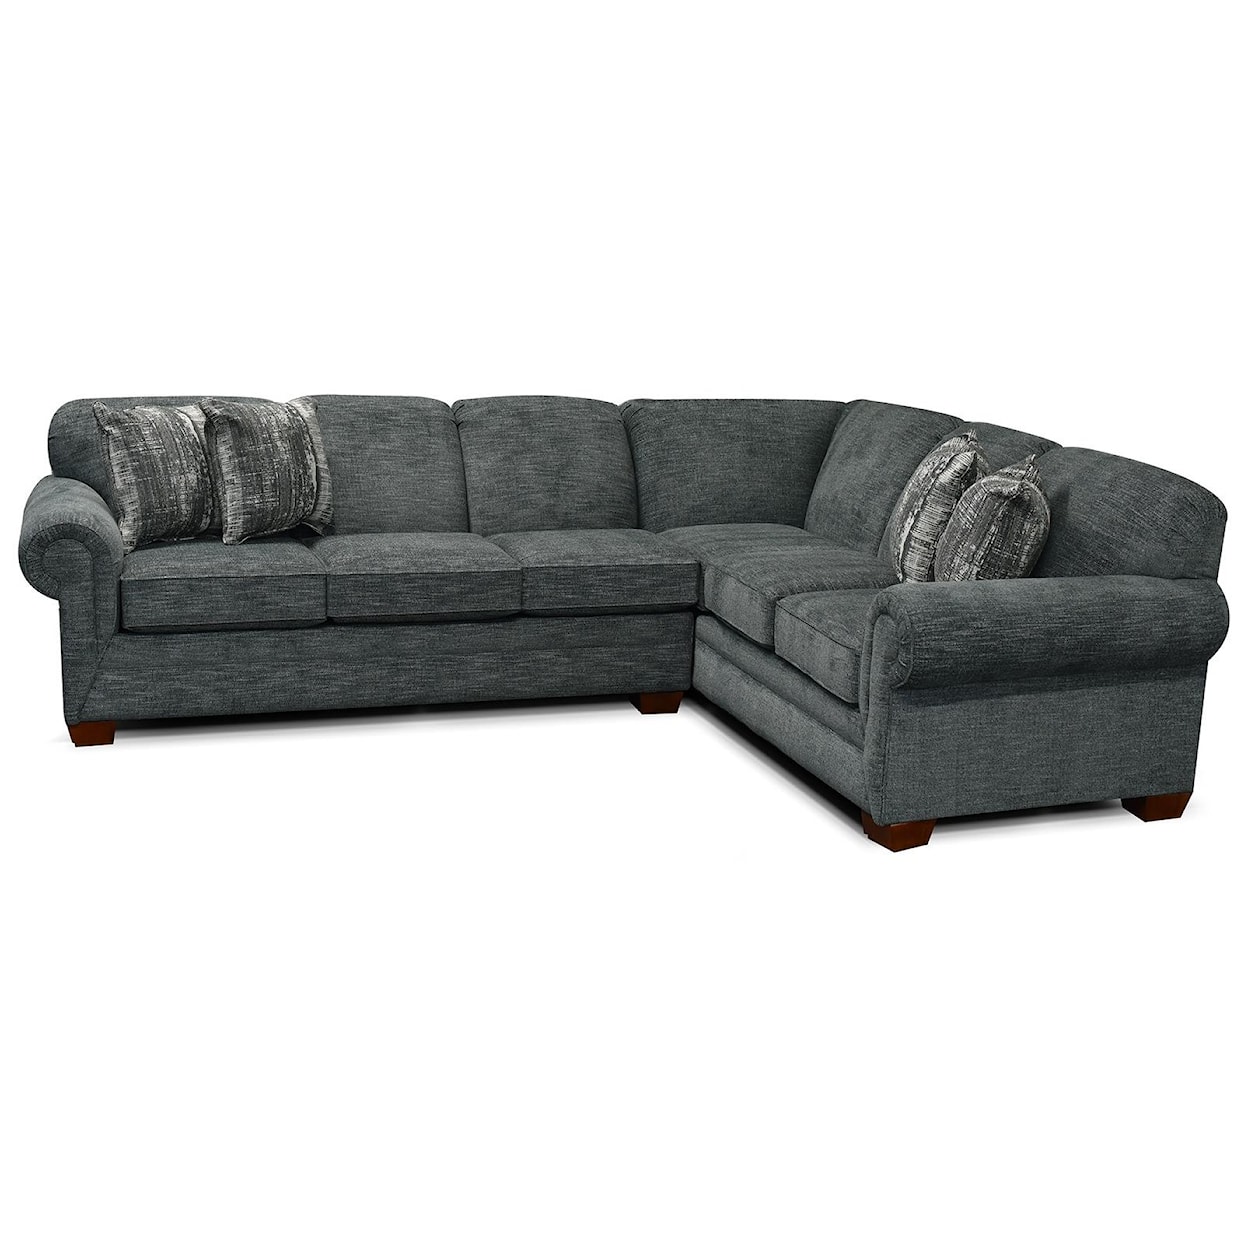 England 1430R/LSR Series 2 Piece LAF Sofa Sectional